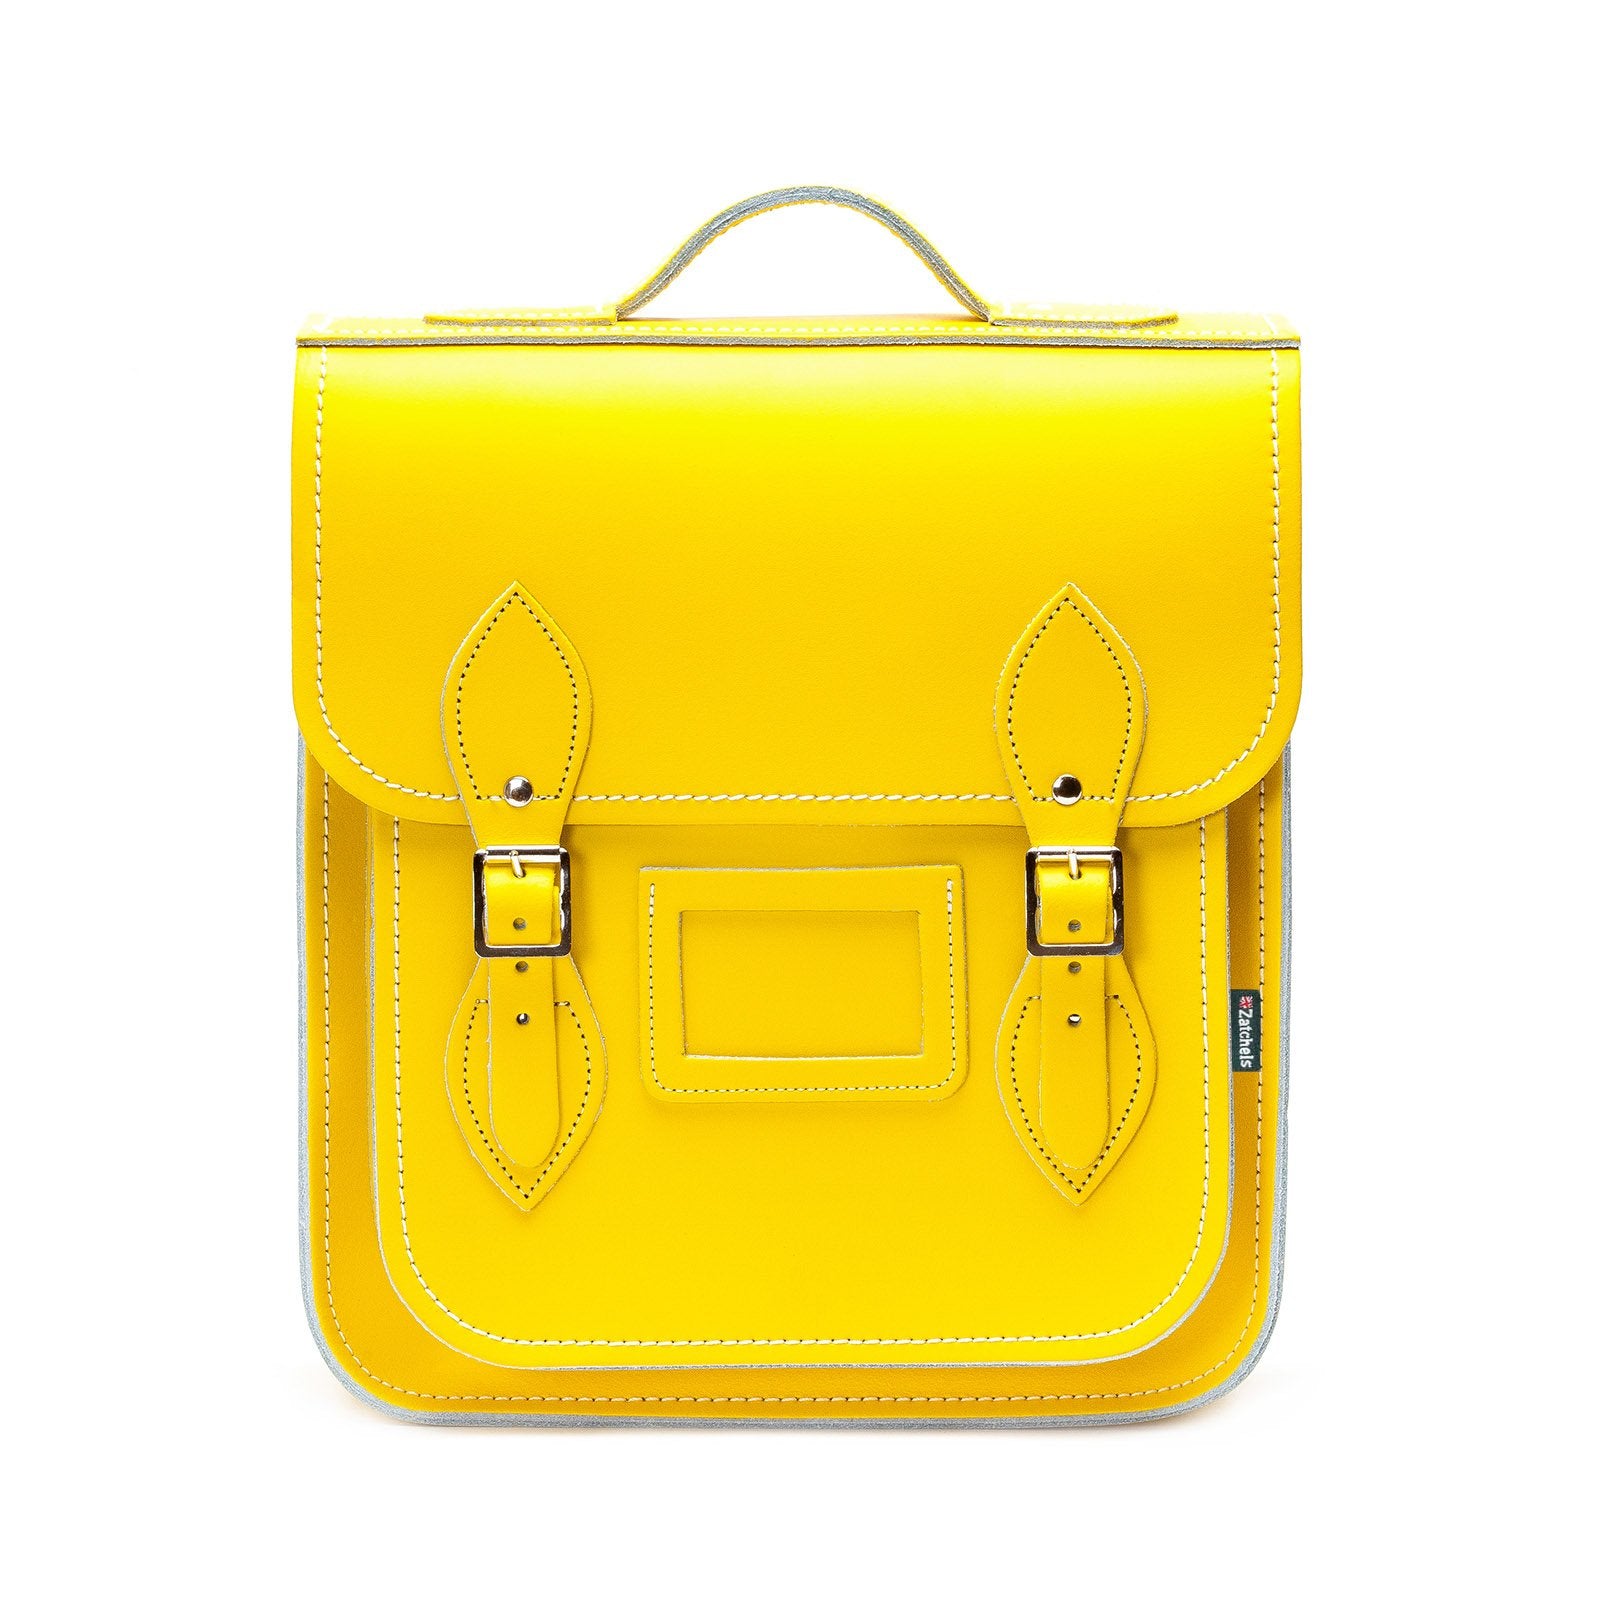 Handmade Leather City Backpack - Pastel Daffodil Yellow - Small